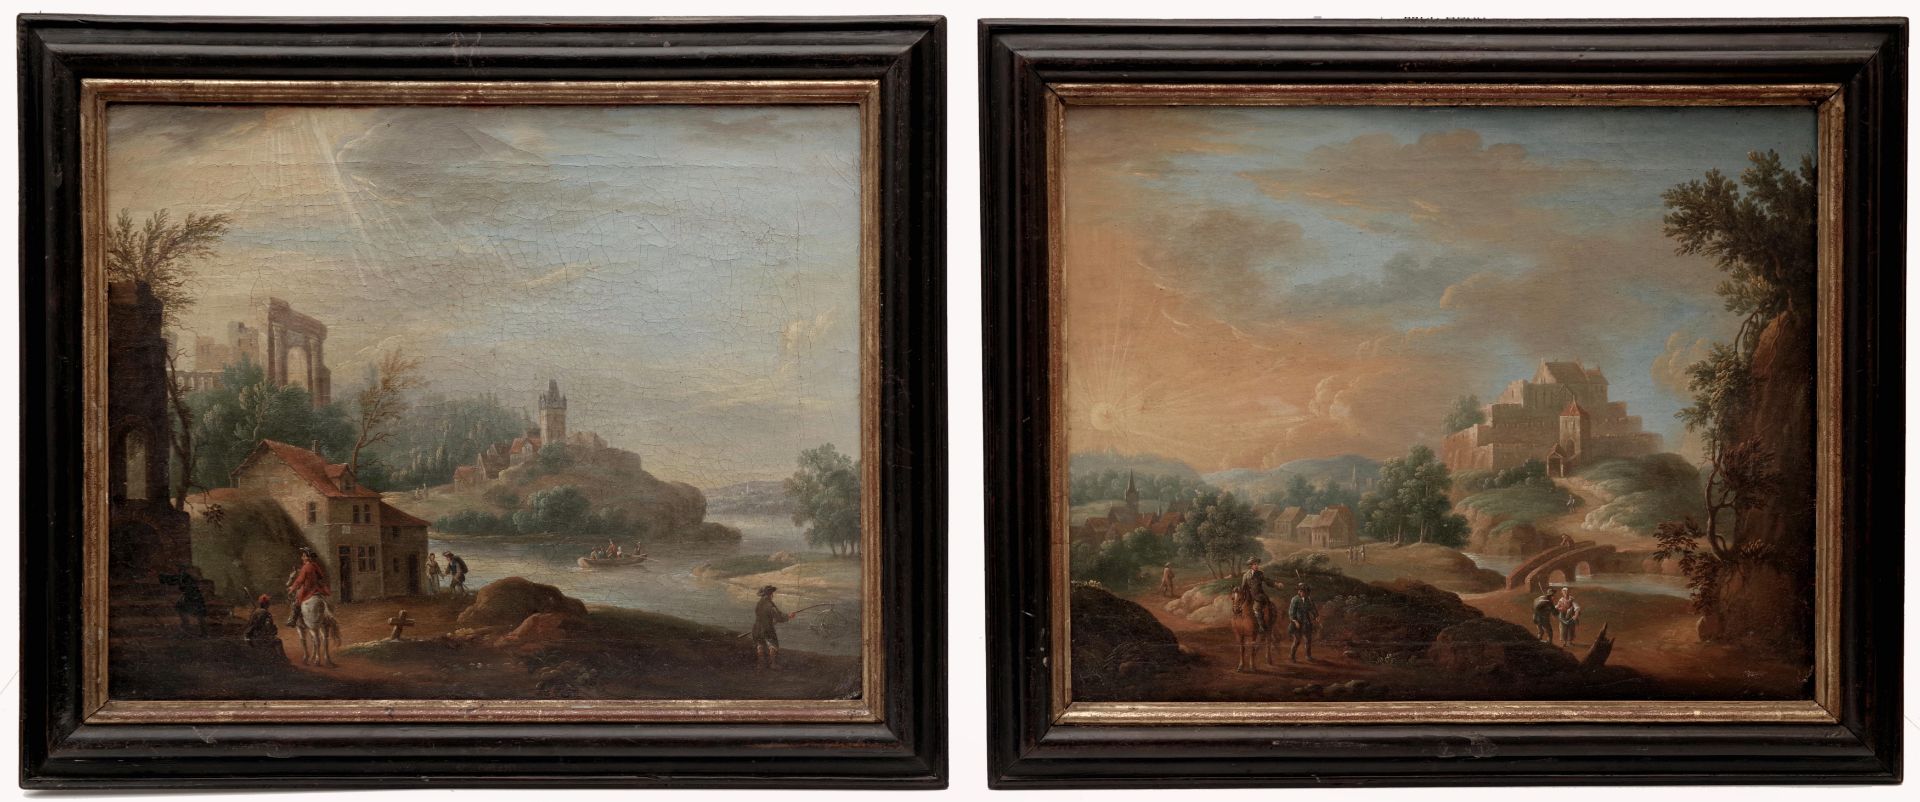 Two landscape paintings, Georg Schneider